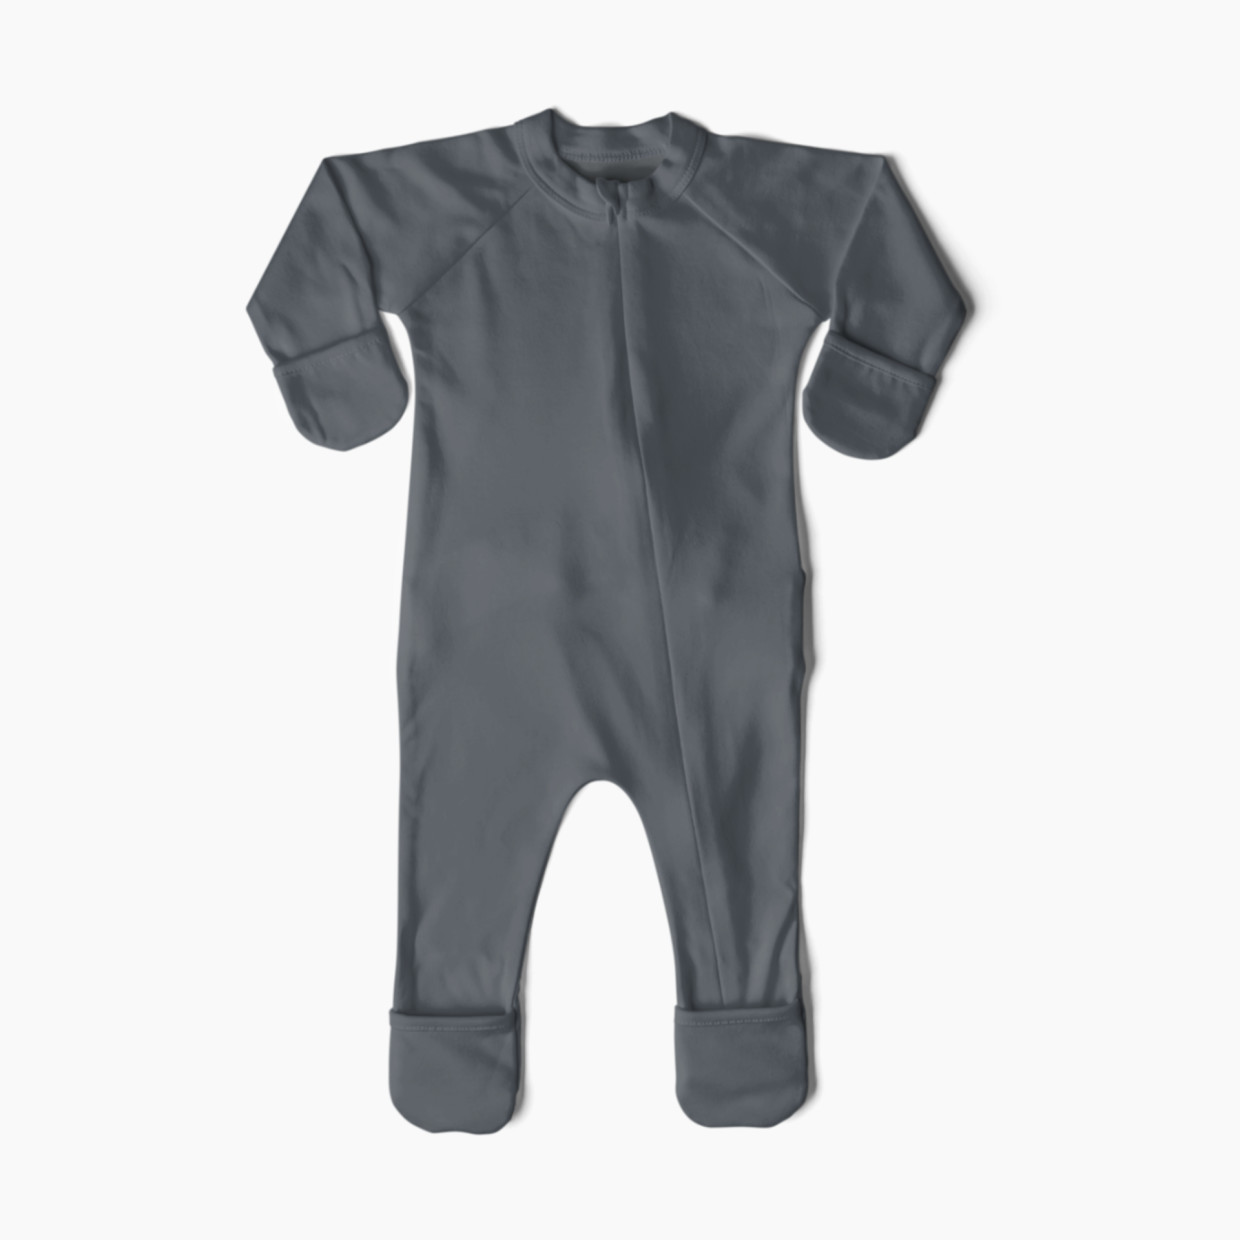 Goumi Kids Grow With You Footie - Loose Fit - Midnight, 0-3 M.